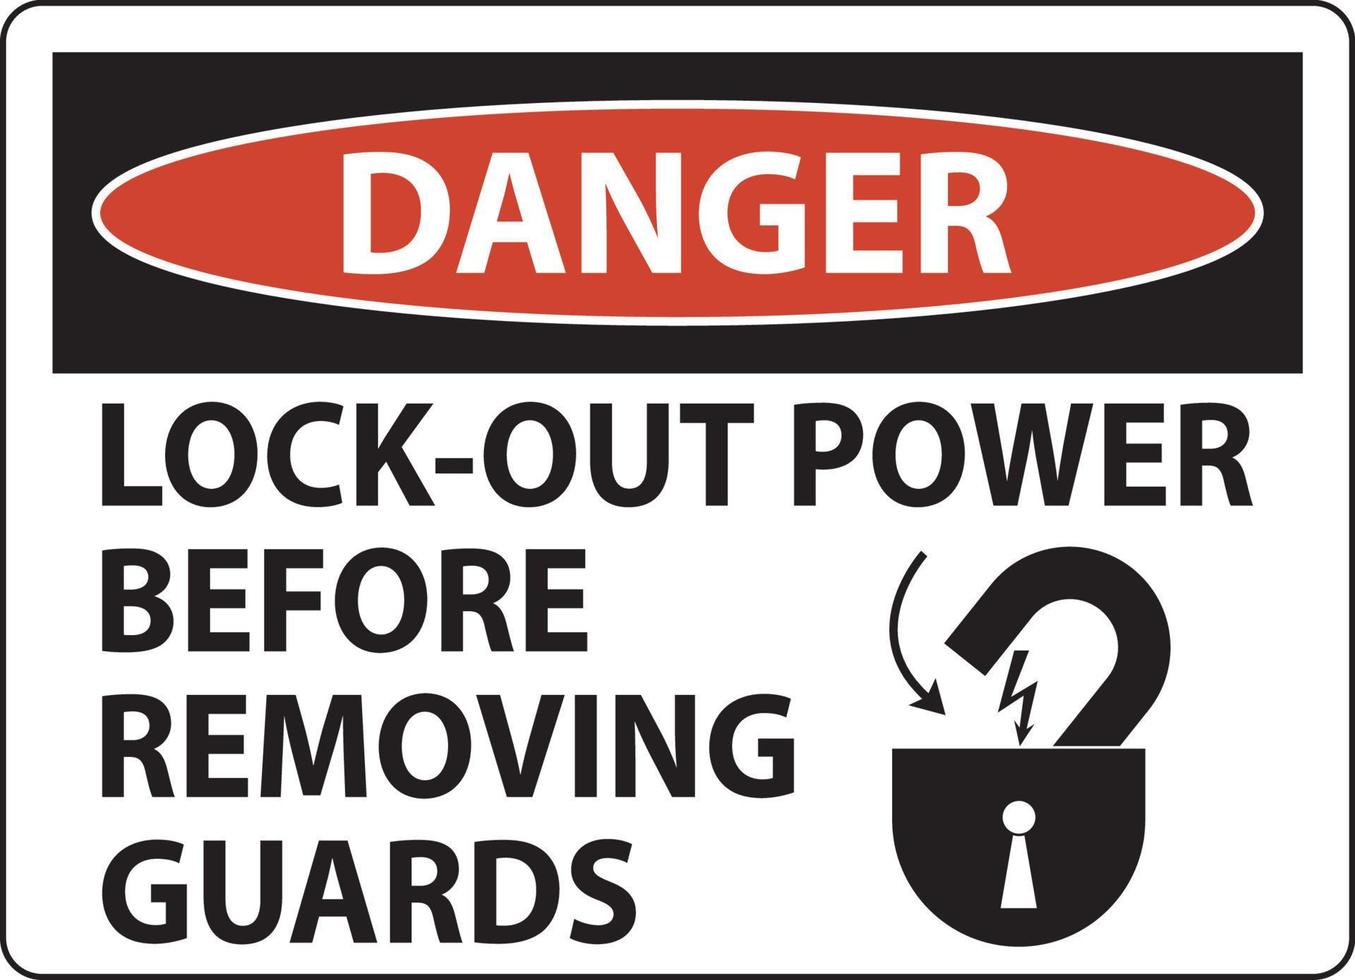 Danger Lock-Out Power Label On White Background vector